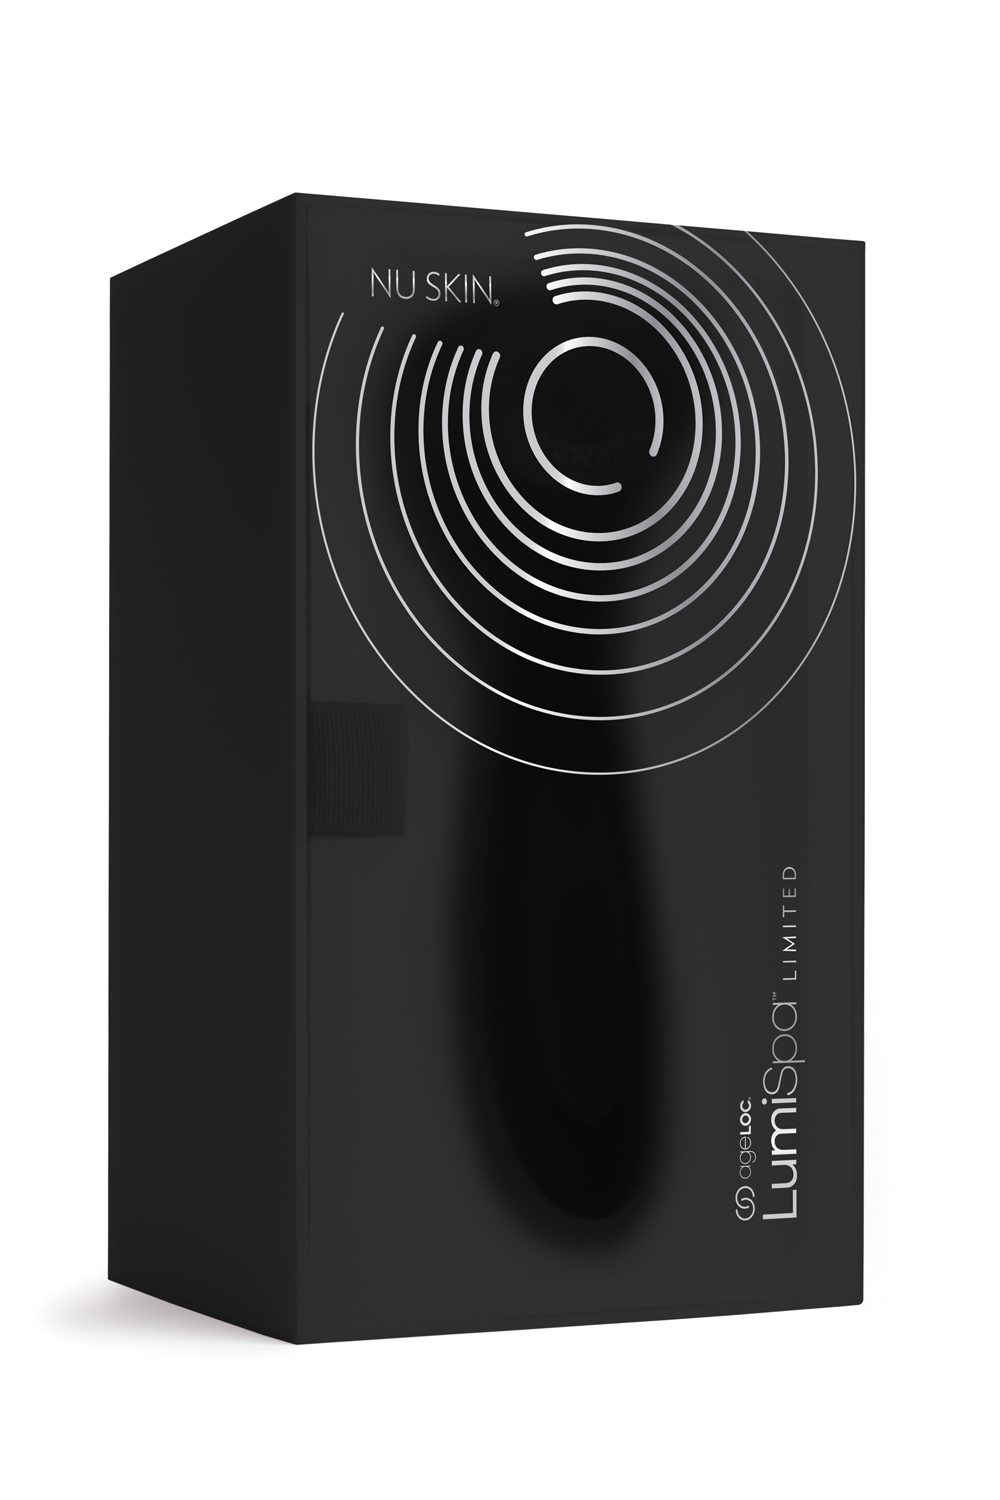 Limited Black-on-Black Device Packaging (3/4)